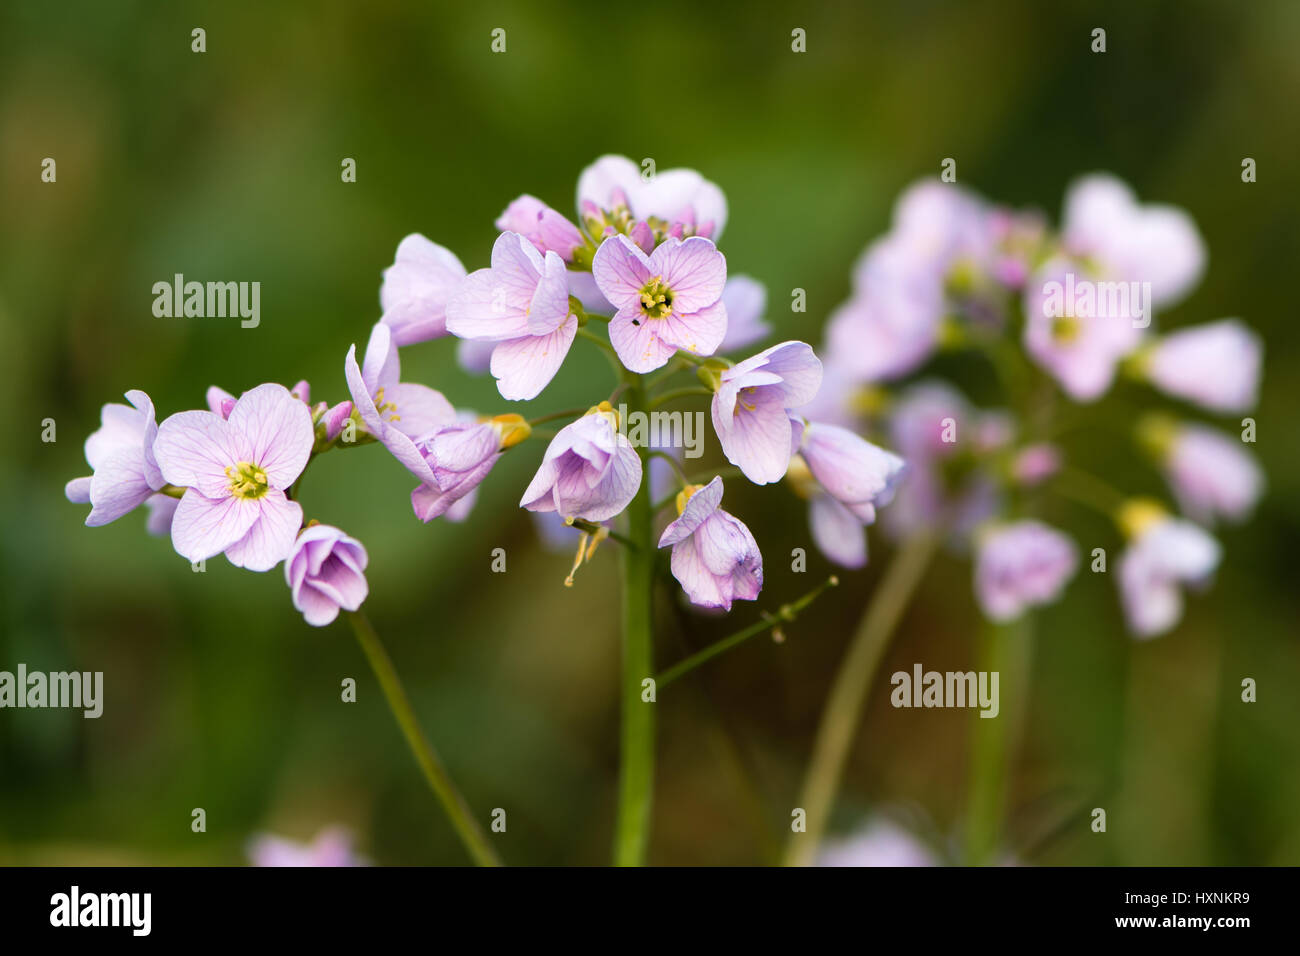 Cuckooflower or lady's smock (Cardamine pratensis) flower spikes. Perennial plant in the cabbage family (Brassicaceae), flowering in Spring in the UK Stock Photo